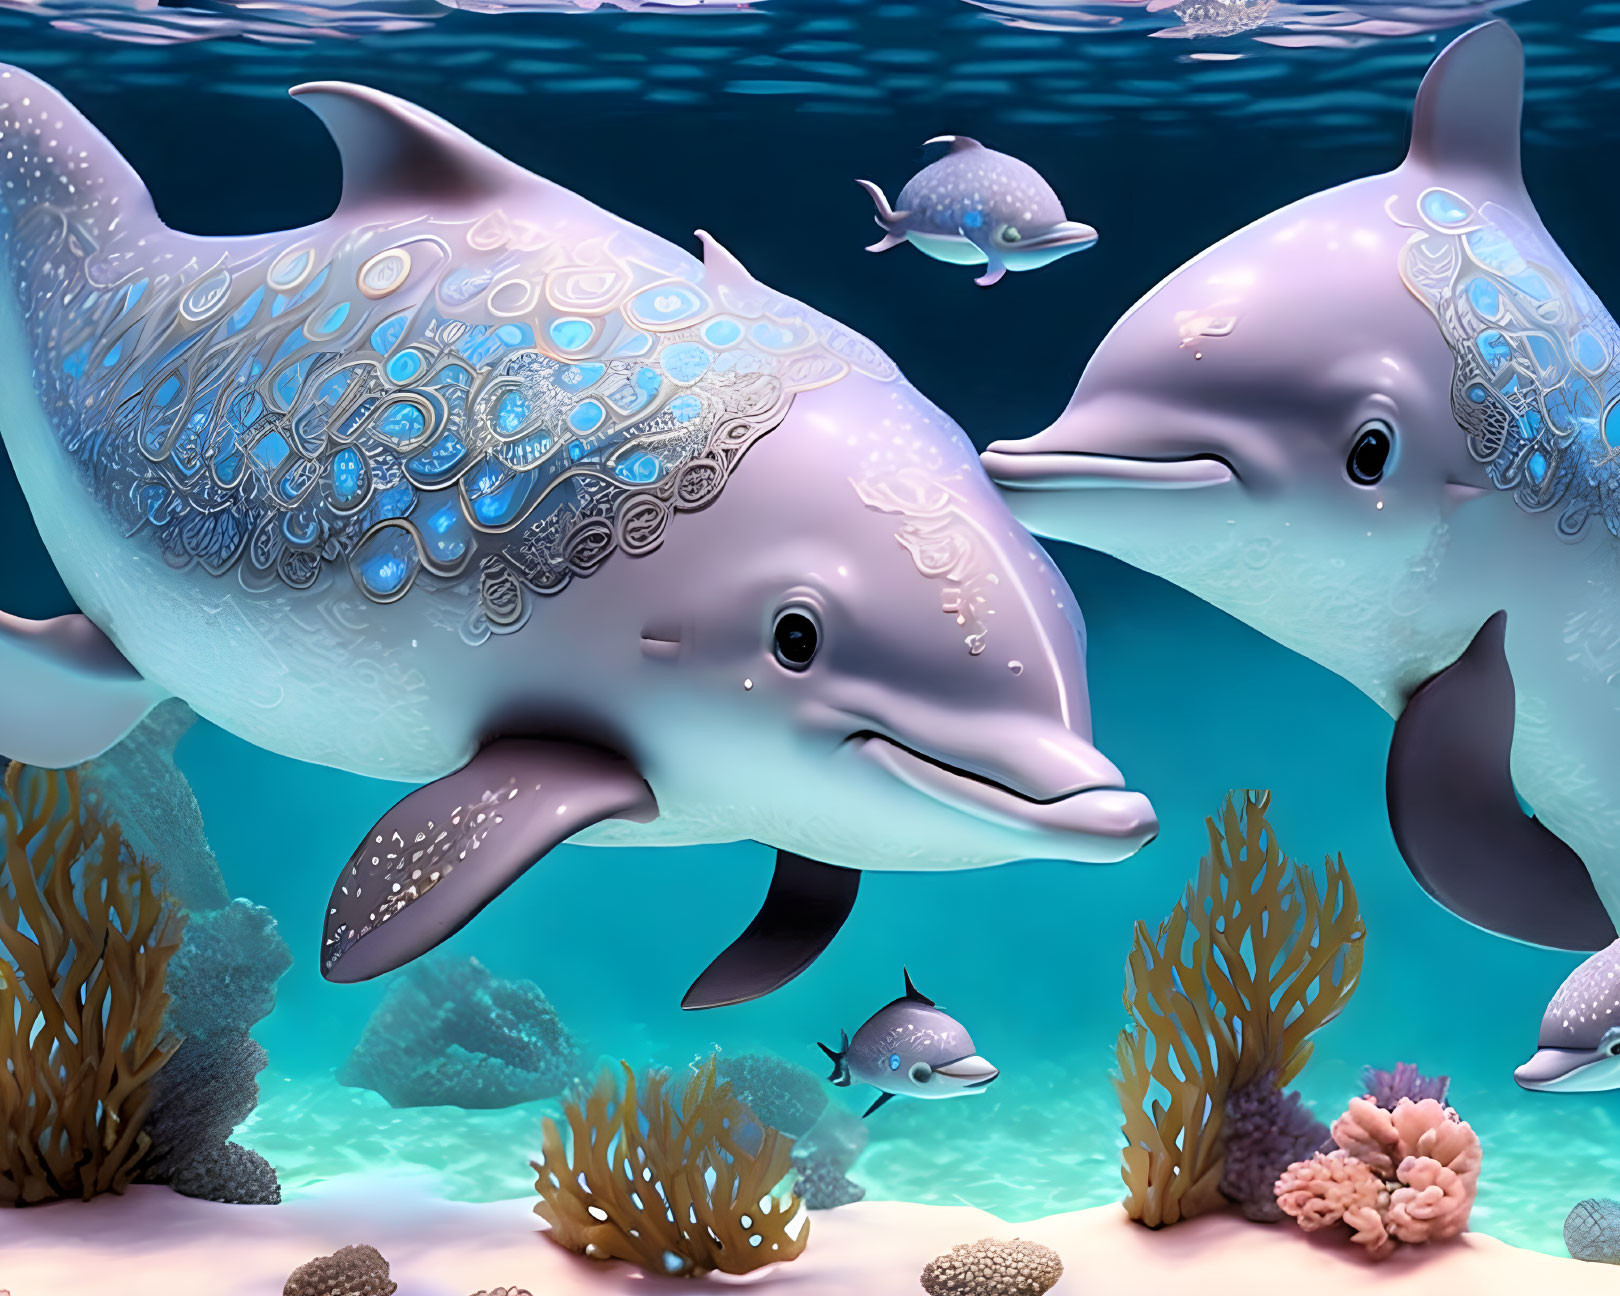 Stylized Dolphins Among Coral Reefs in Vibrant Underwater Scene